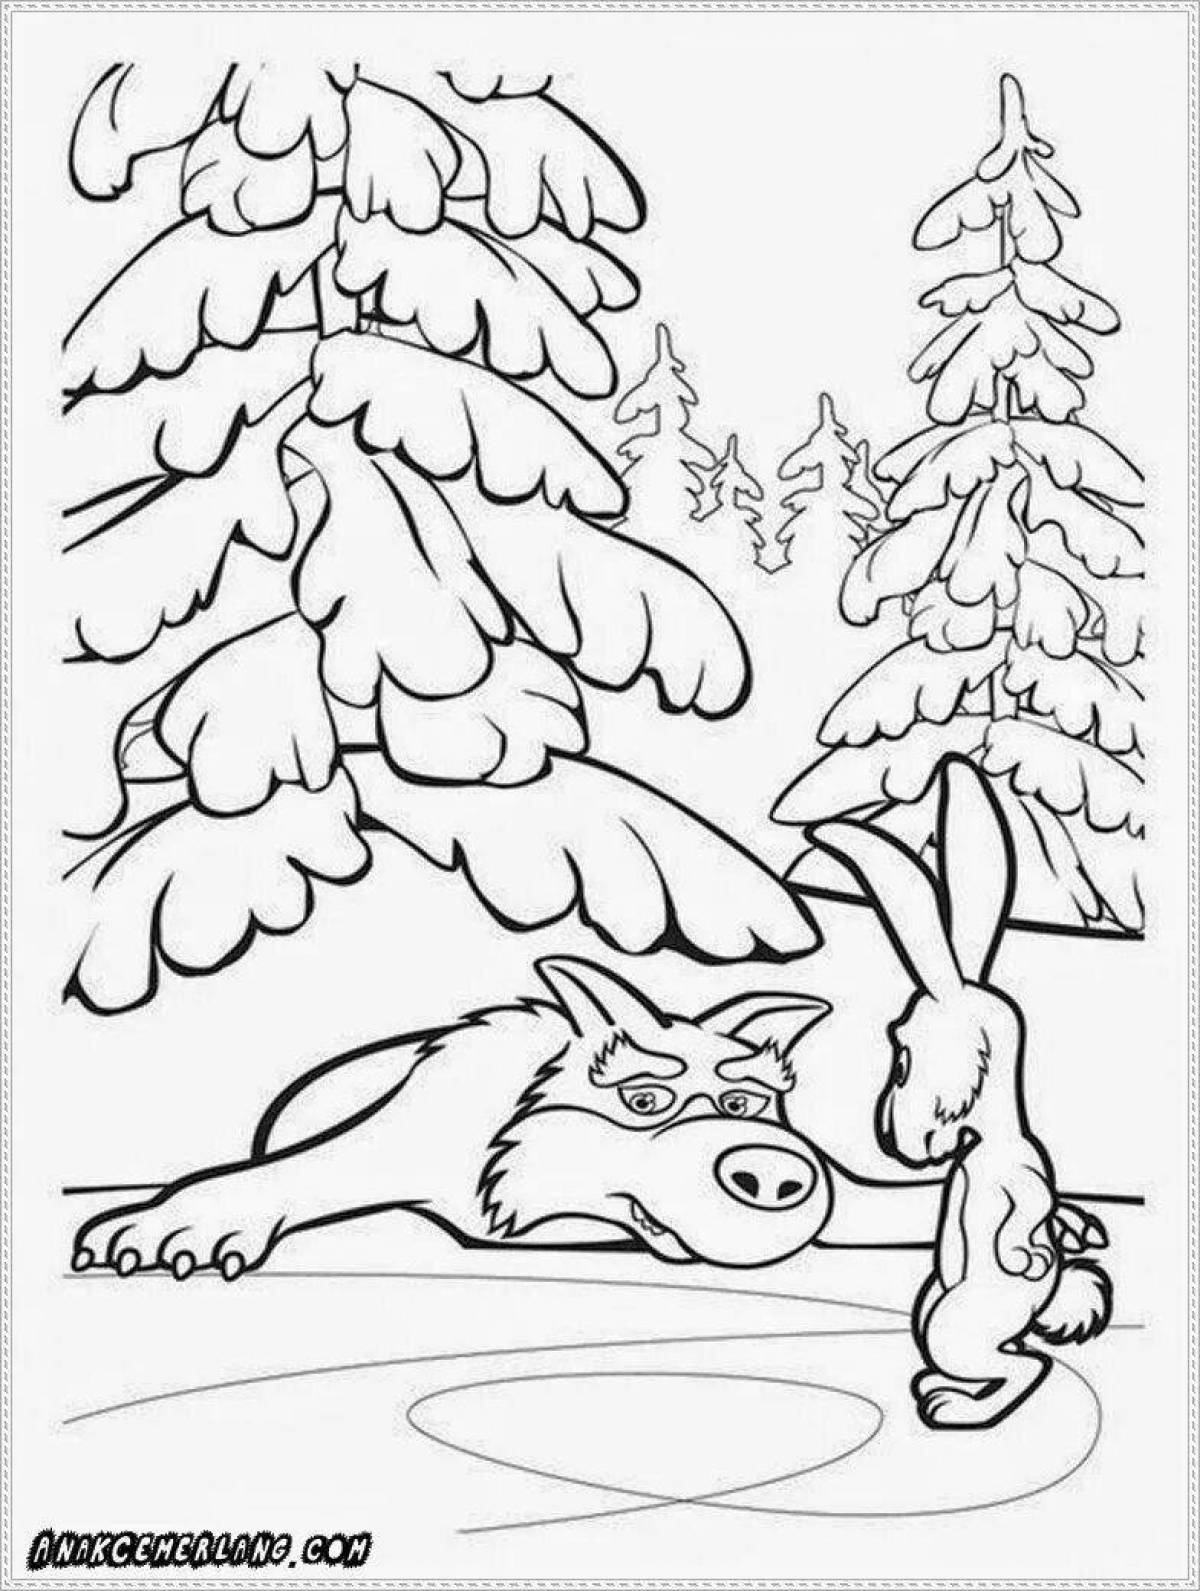 Coloring page charming winter forest with animals